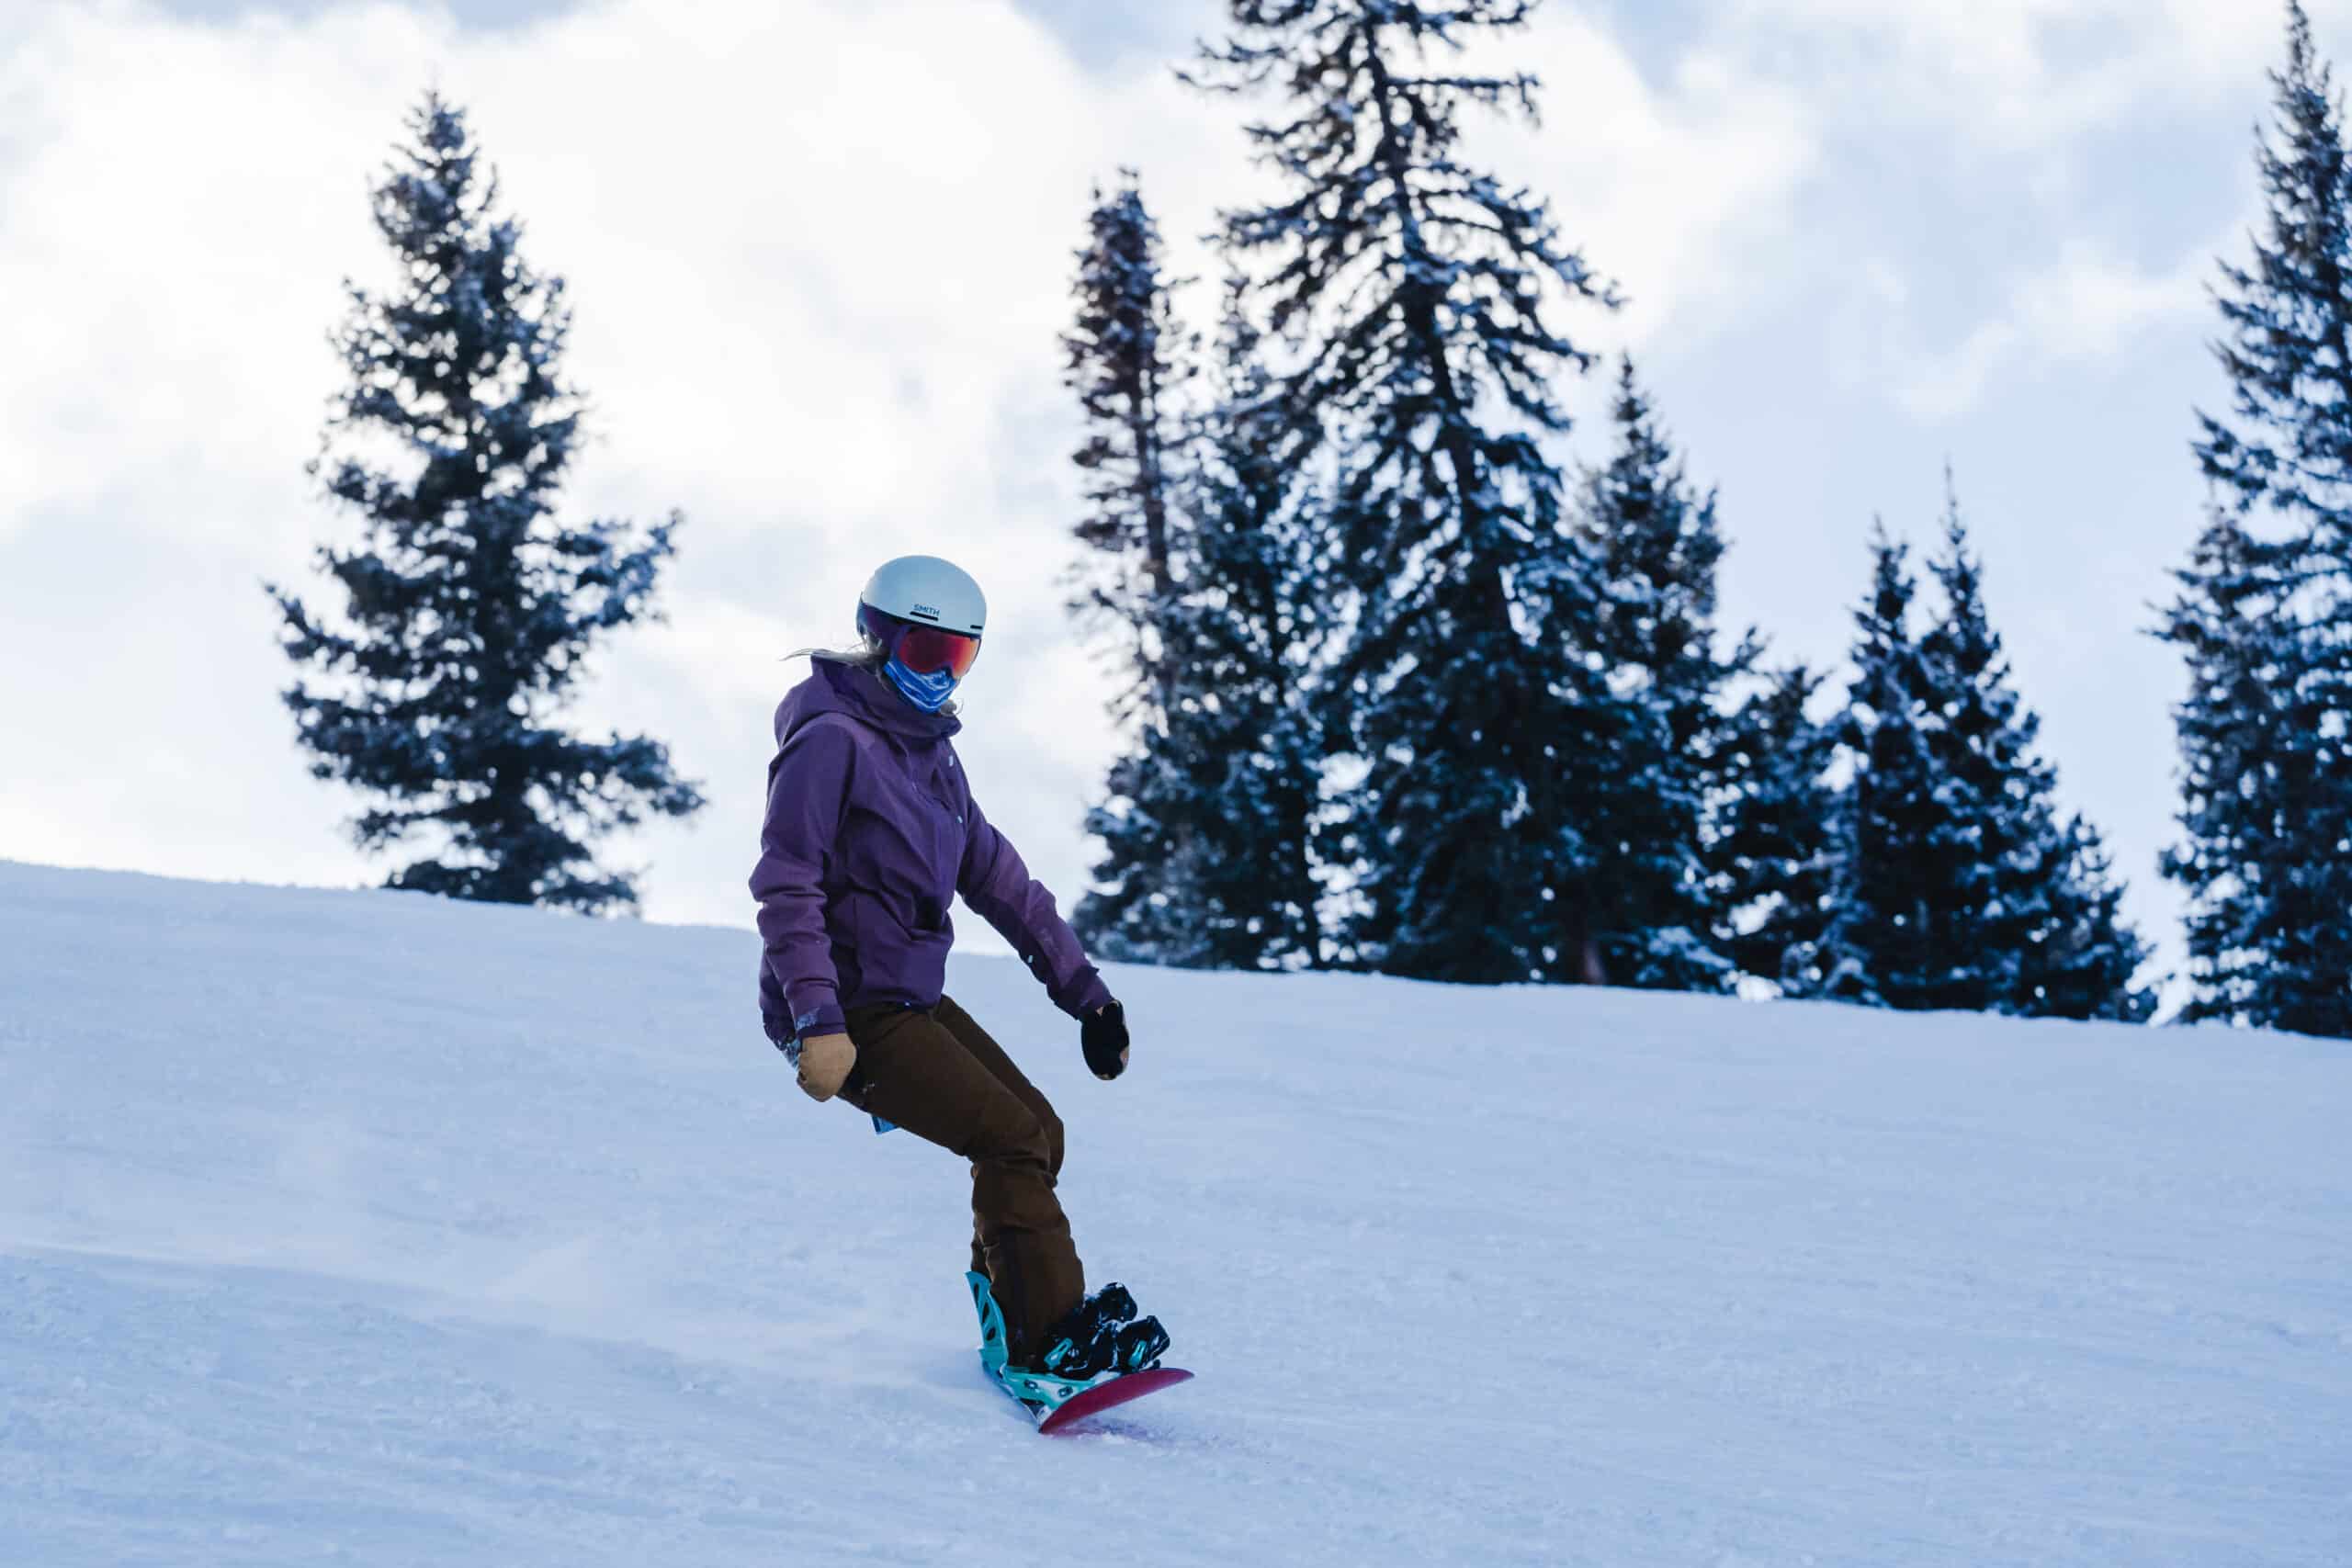 A woman snowboards down a slope with trees in the background